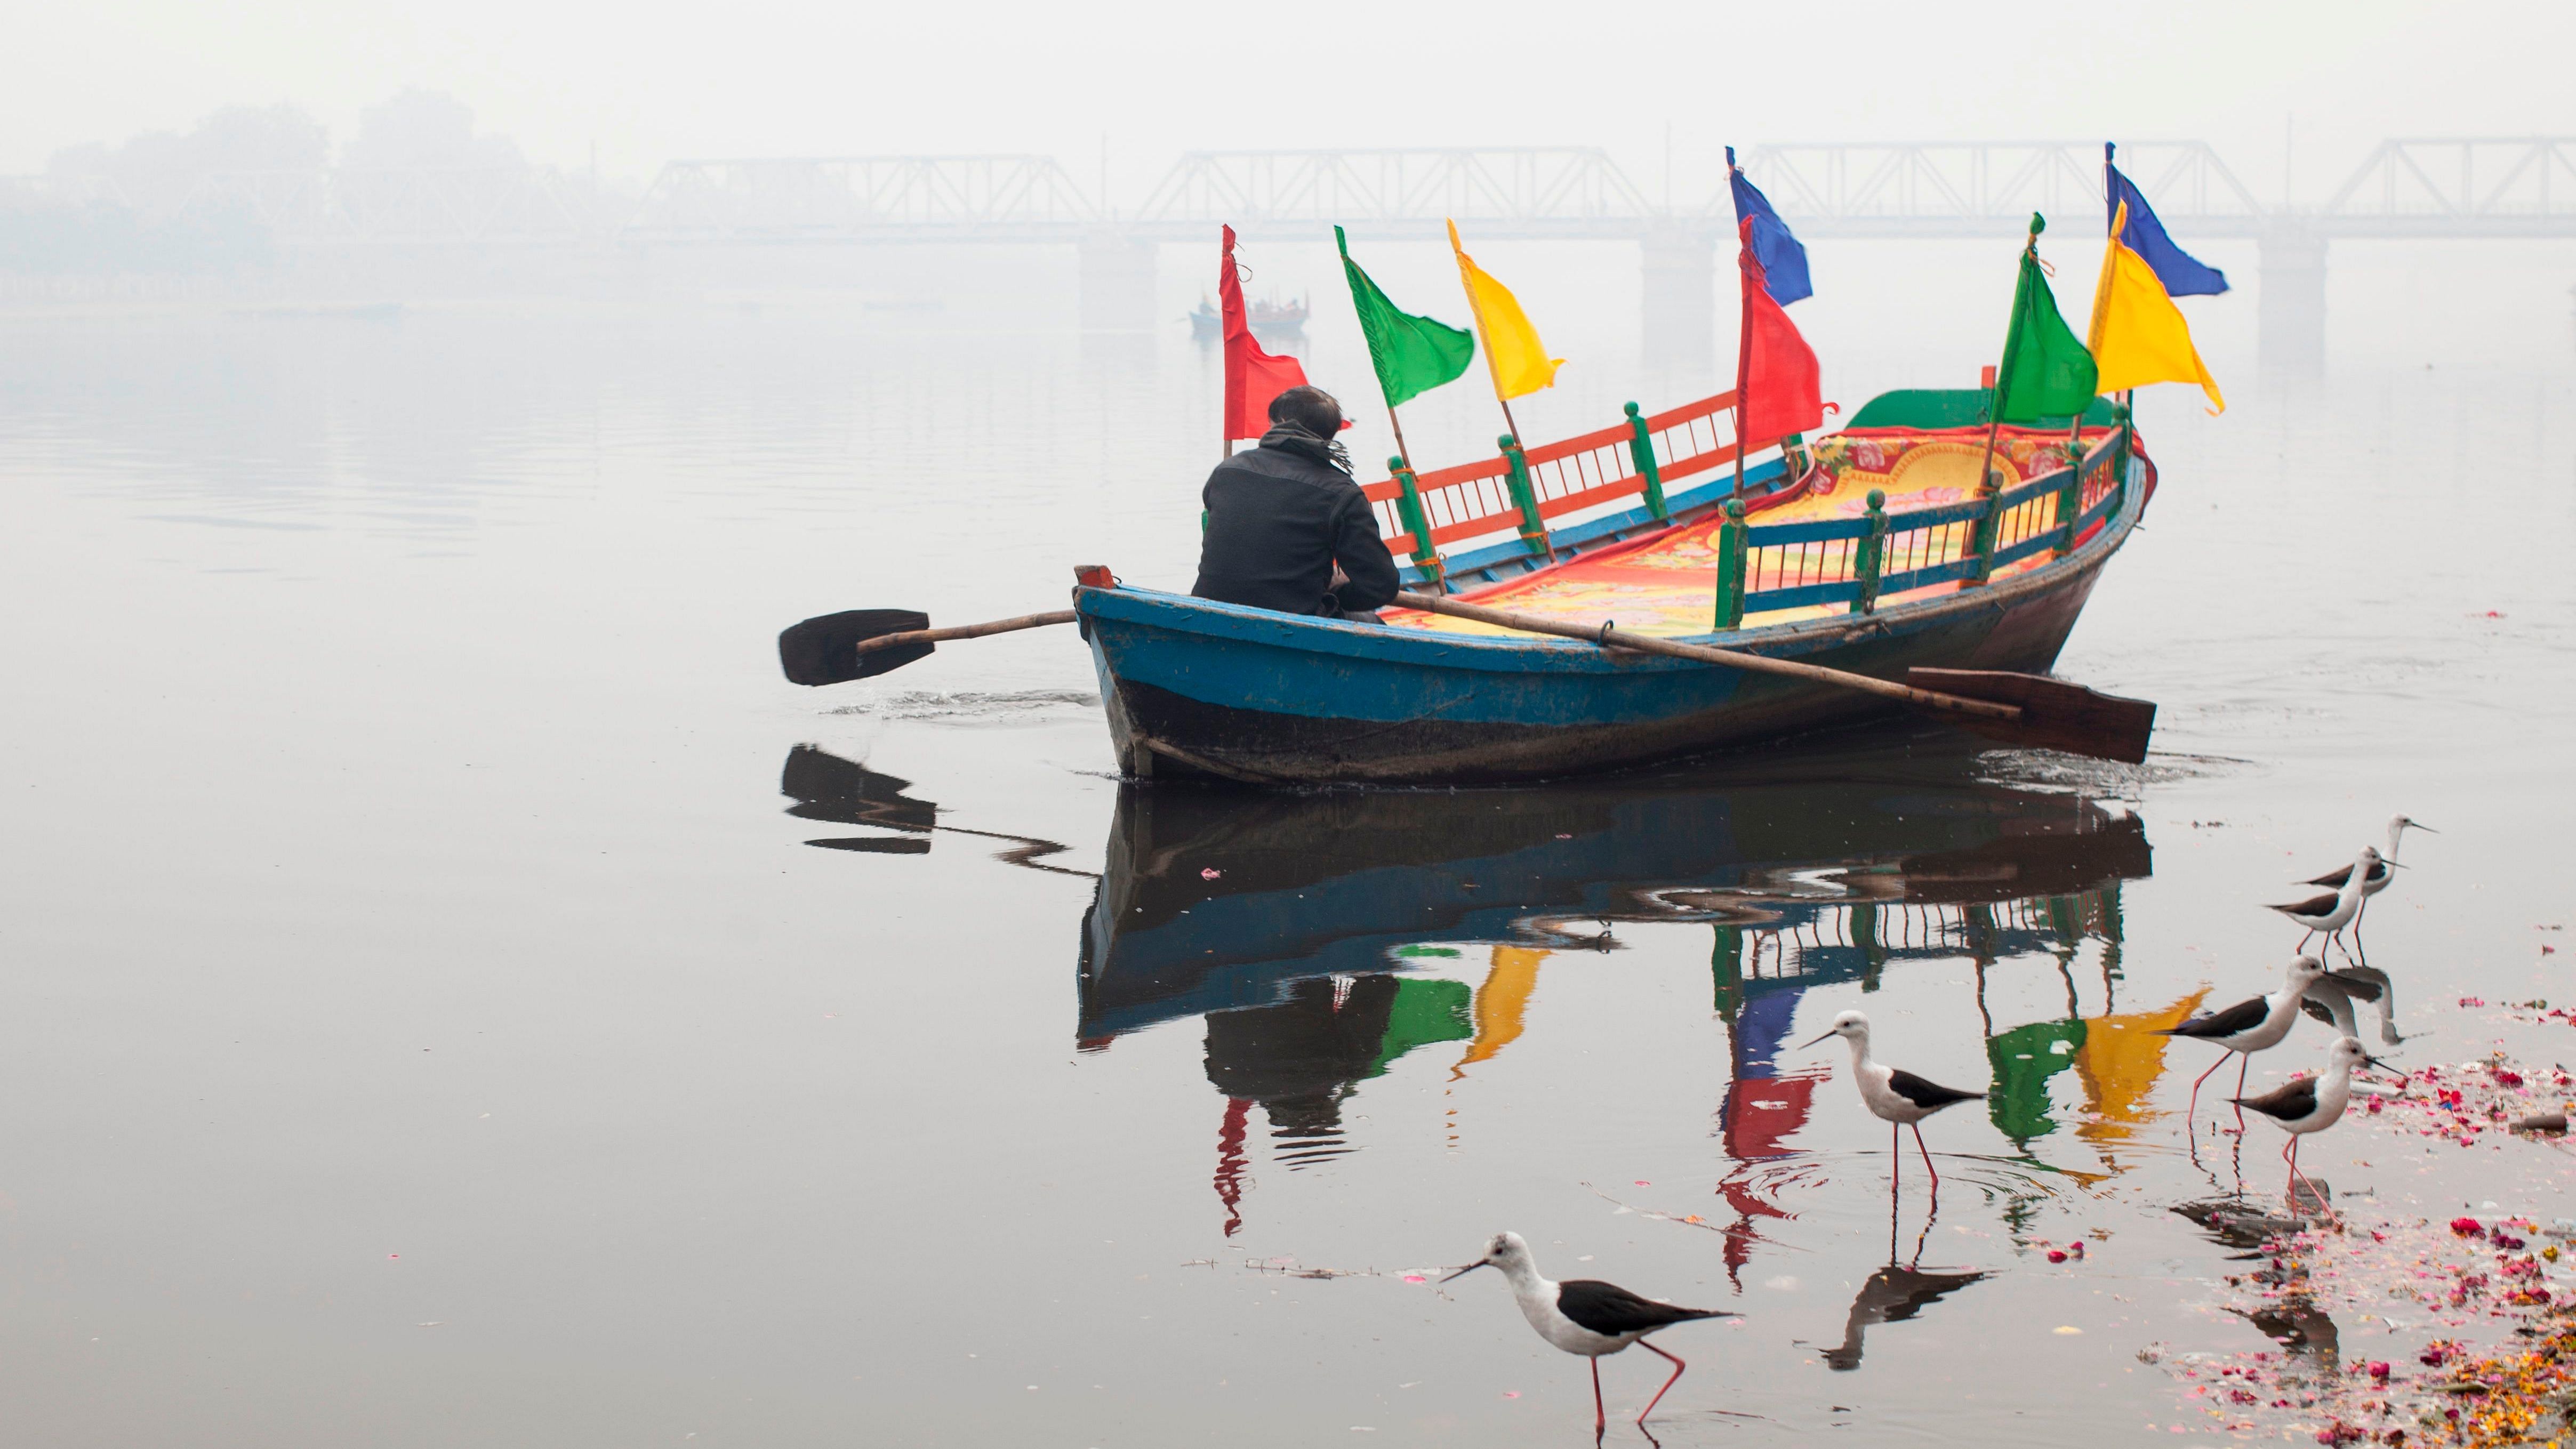 The river yatras, named as 'Kamal Nauka Yatra', have members of fishermen and boatmen communities travelling by the BJP boats, talking about the party's initiatives for the community that is politically dominant along the banks of the Ganga and the Yamuna in Uttar Pradesh. Credit: PTi File Photo